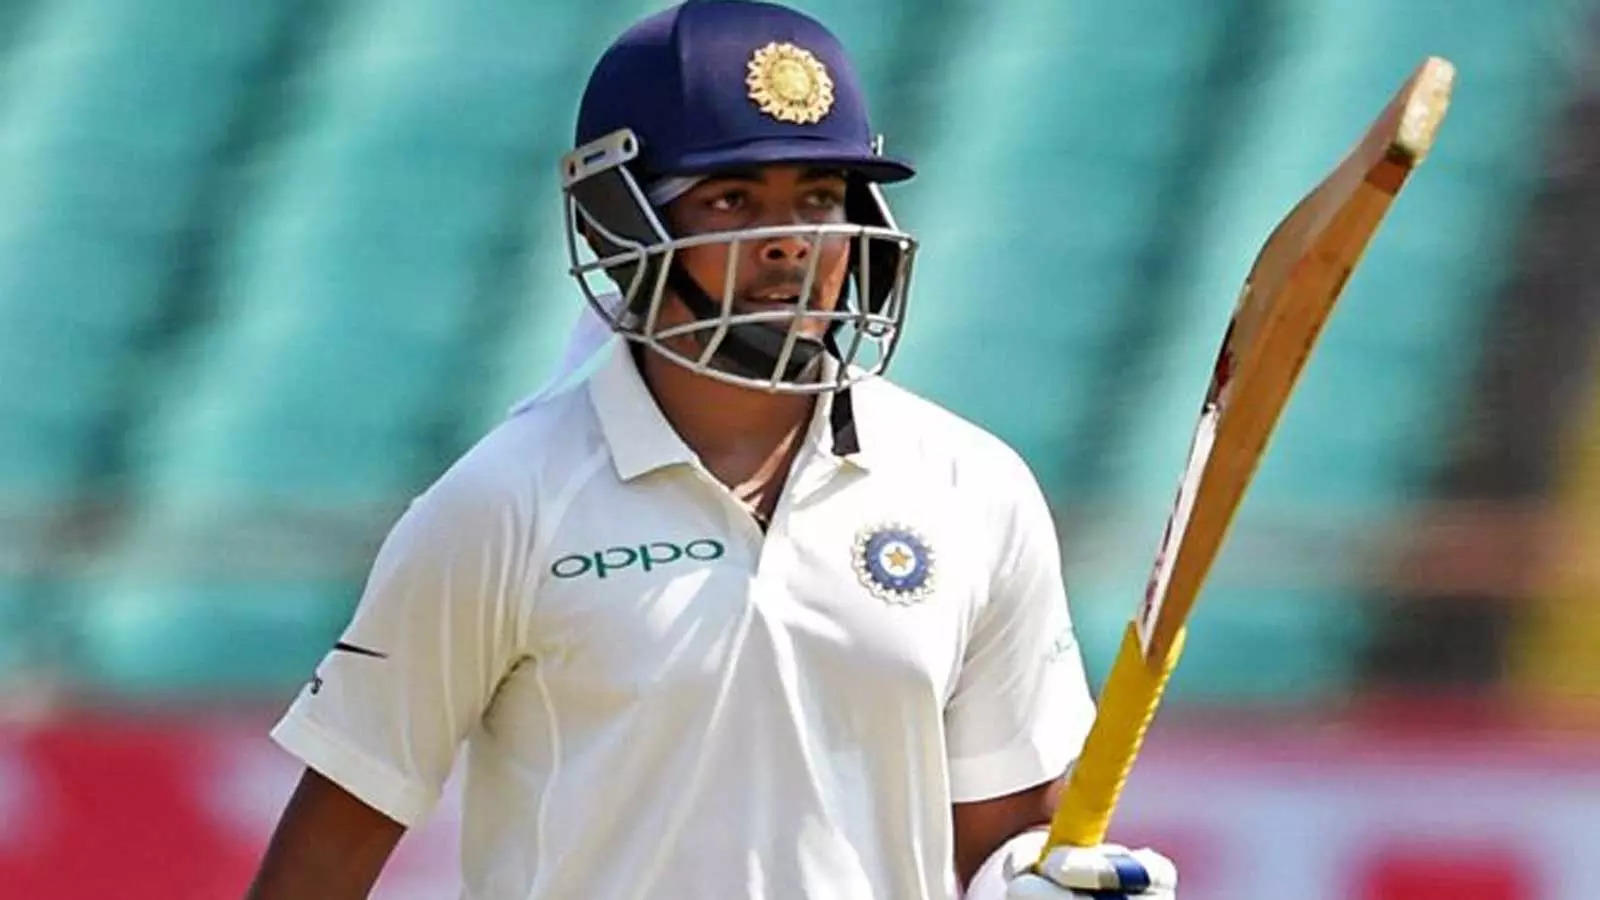 Prithvi Shaw has 3 fifties to his name in this Ranji Trophy campaign